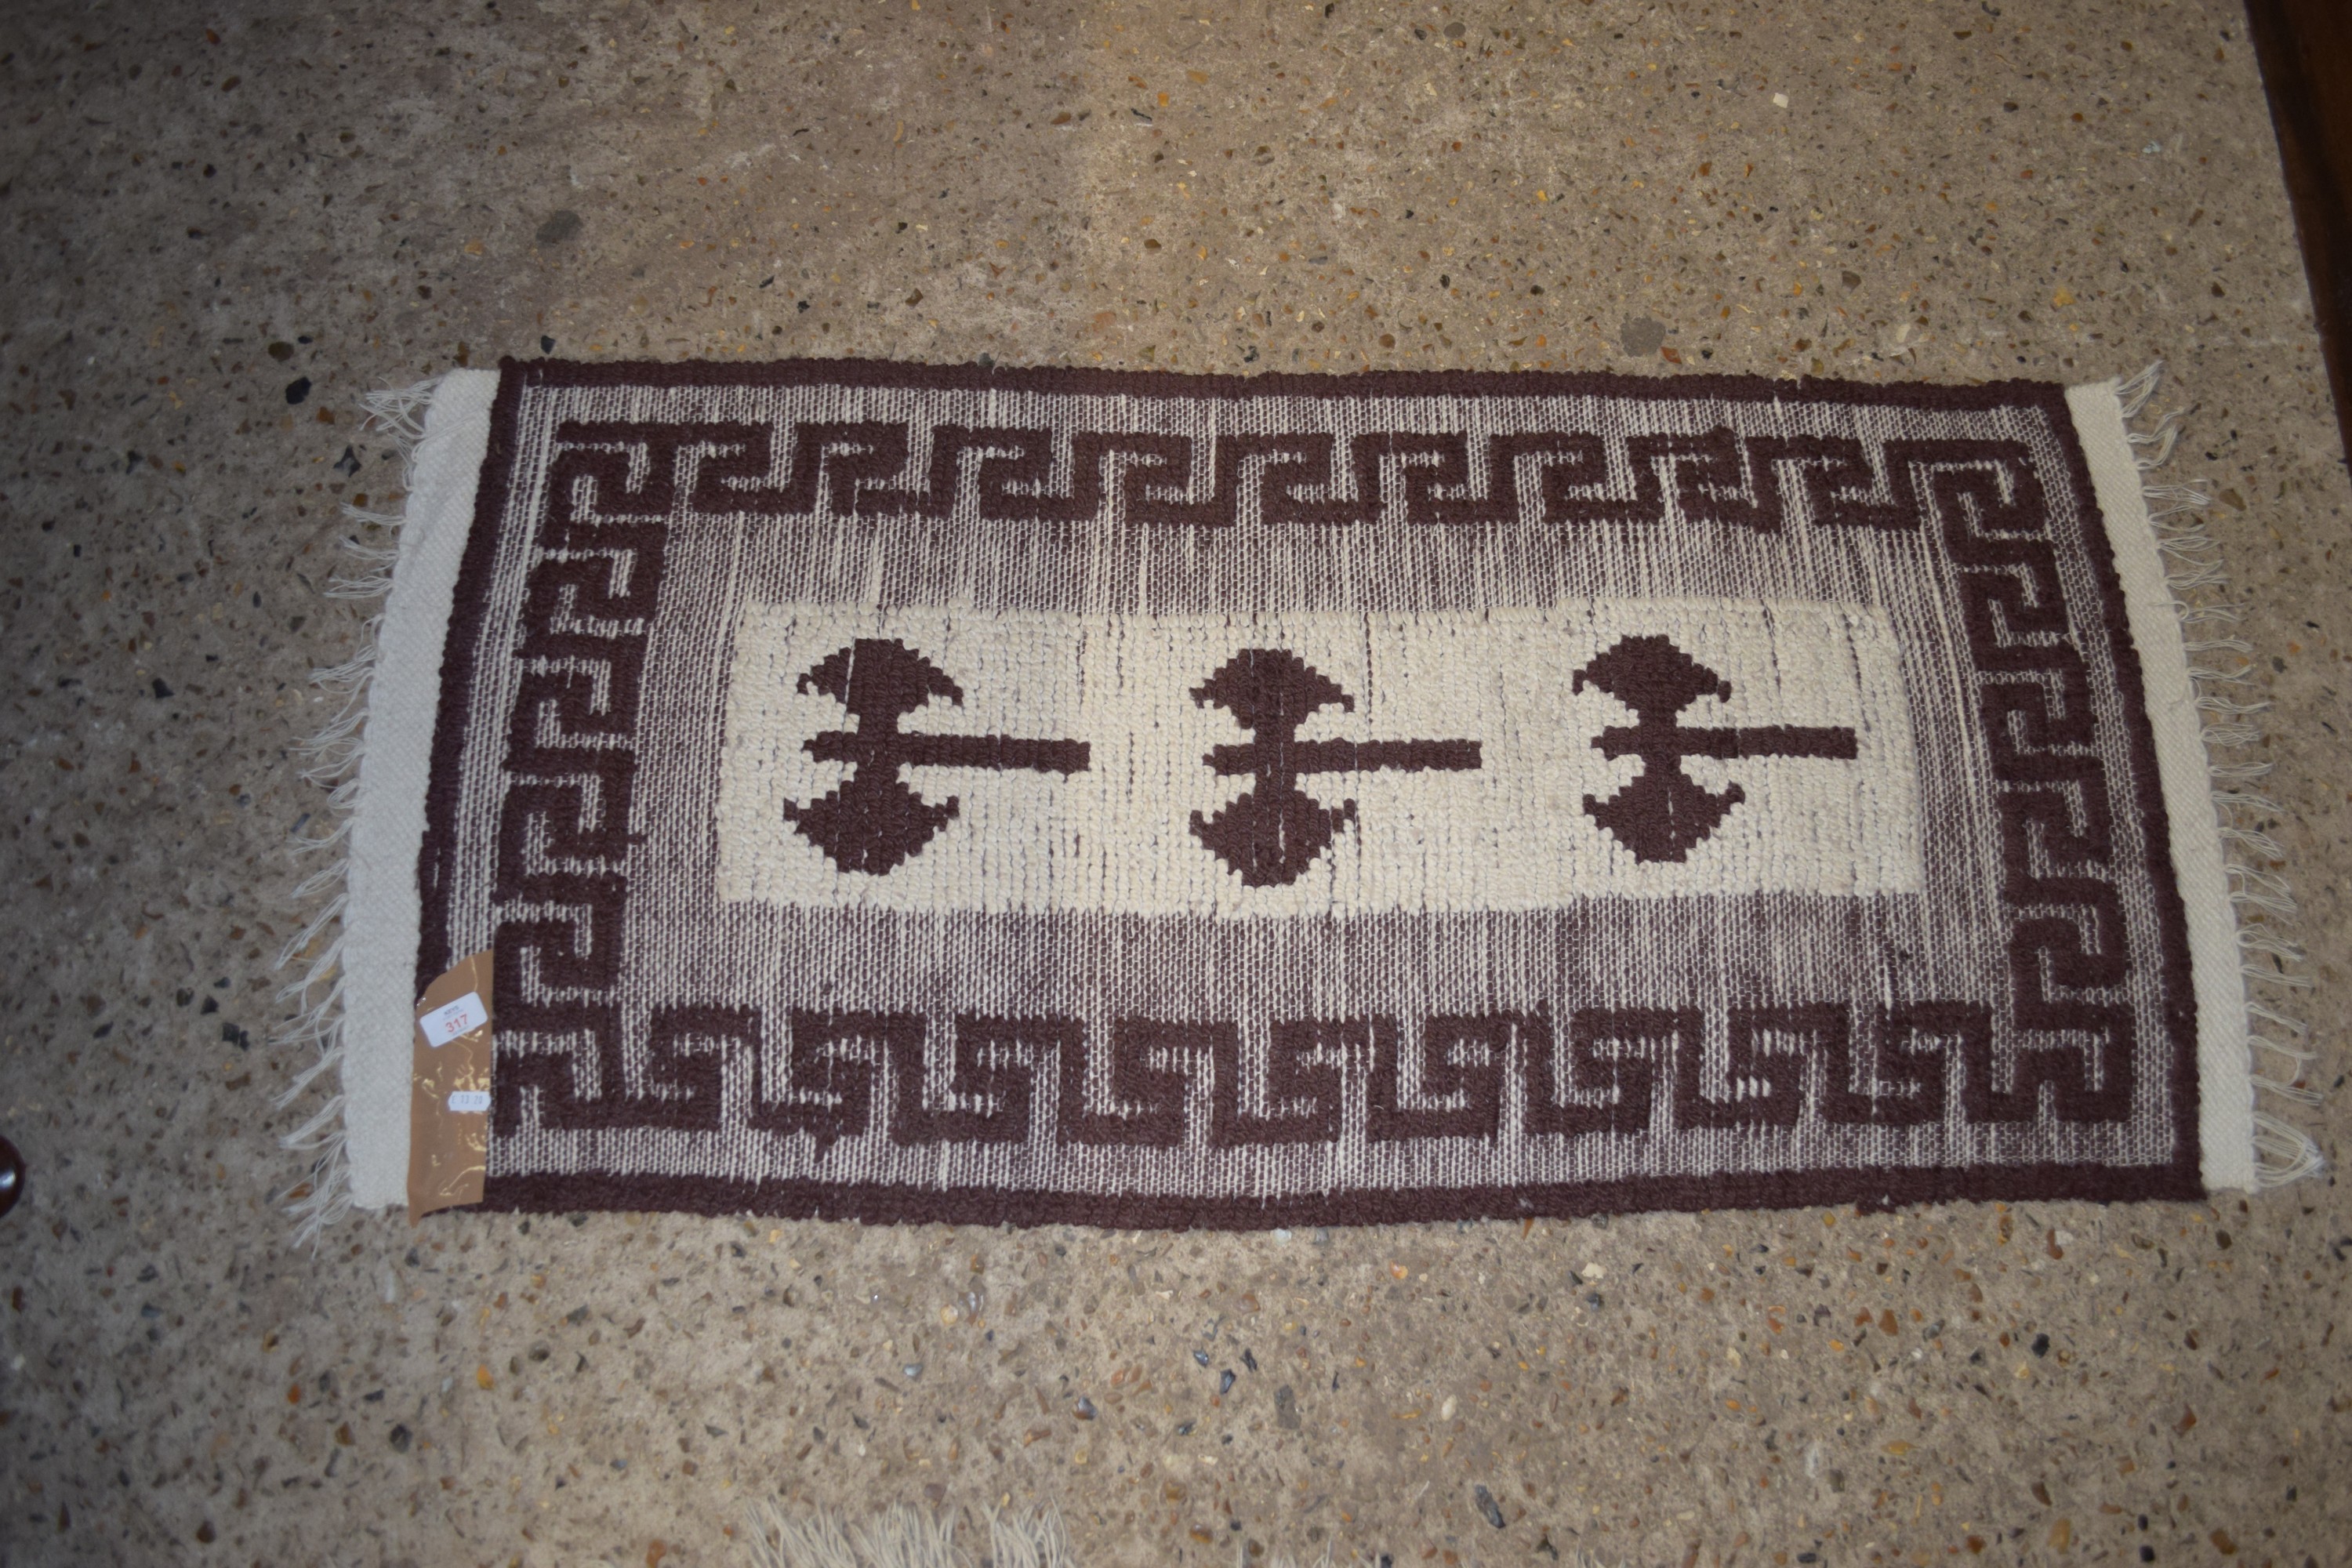 SMALL RUG, APPROX 124 X 58CM